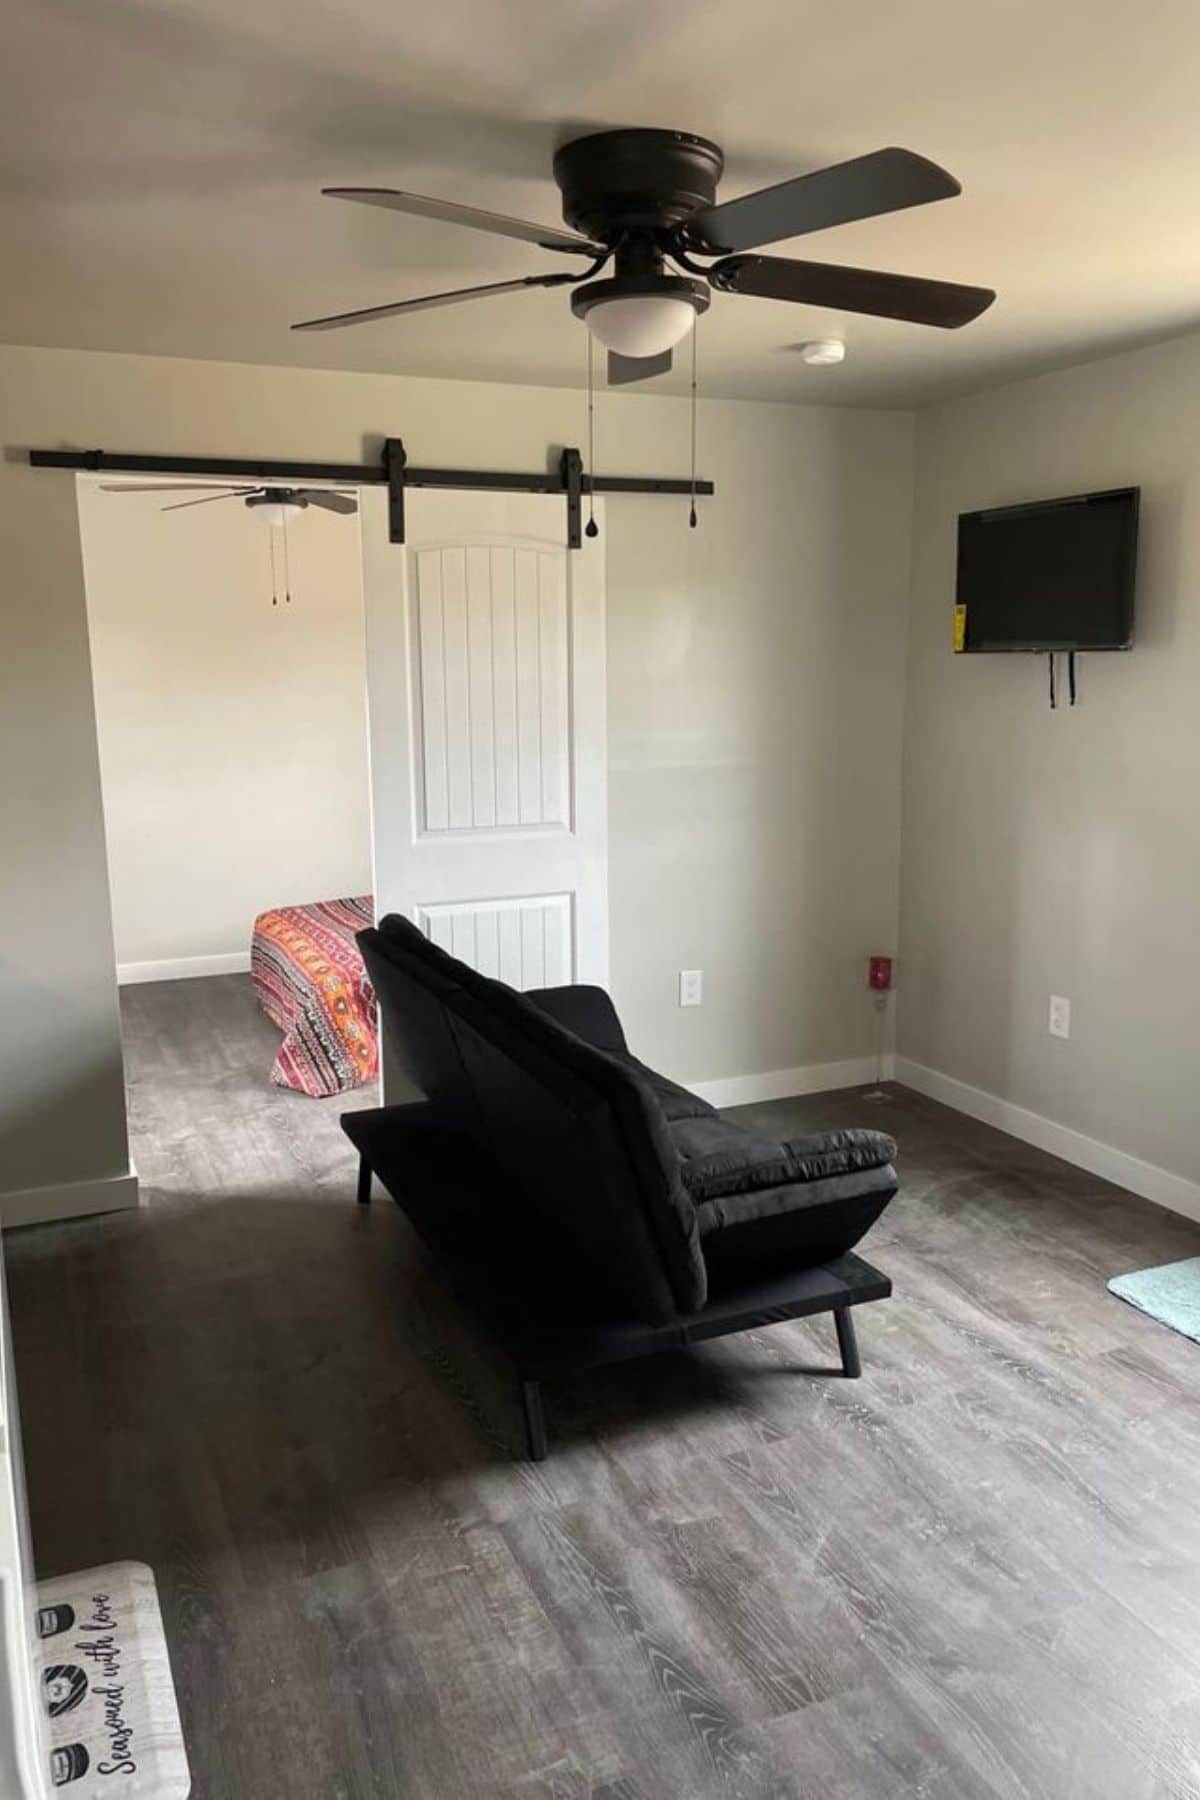 black sofa in middle of room below ceiling fan with tv on wall